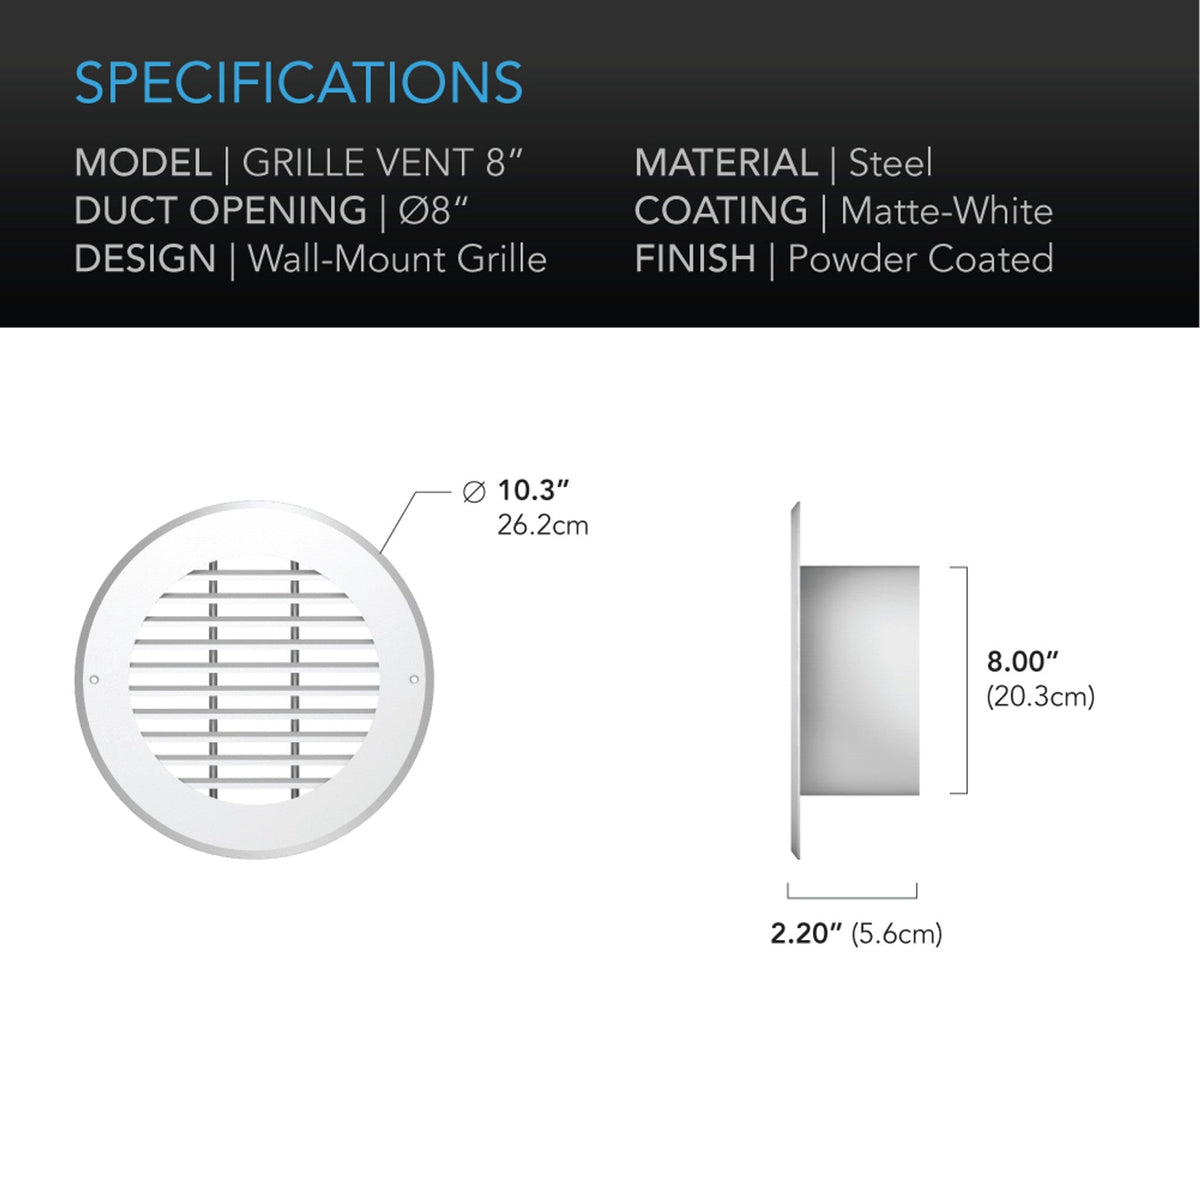 Wall-Mounted Duct Grille Vent 8 inch Specifications